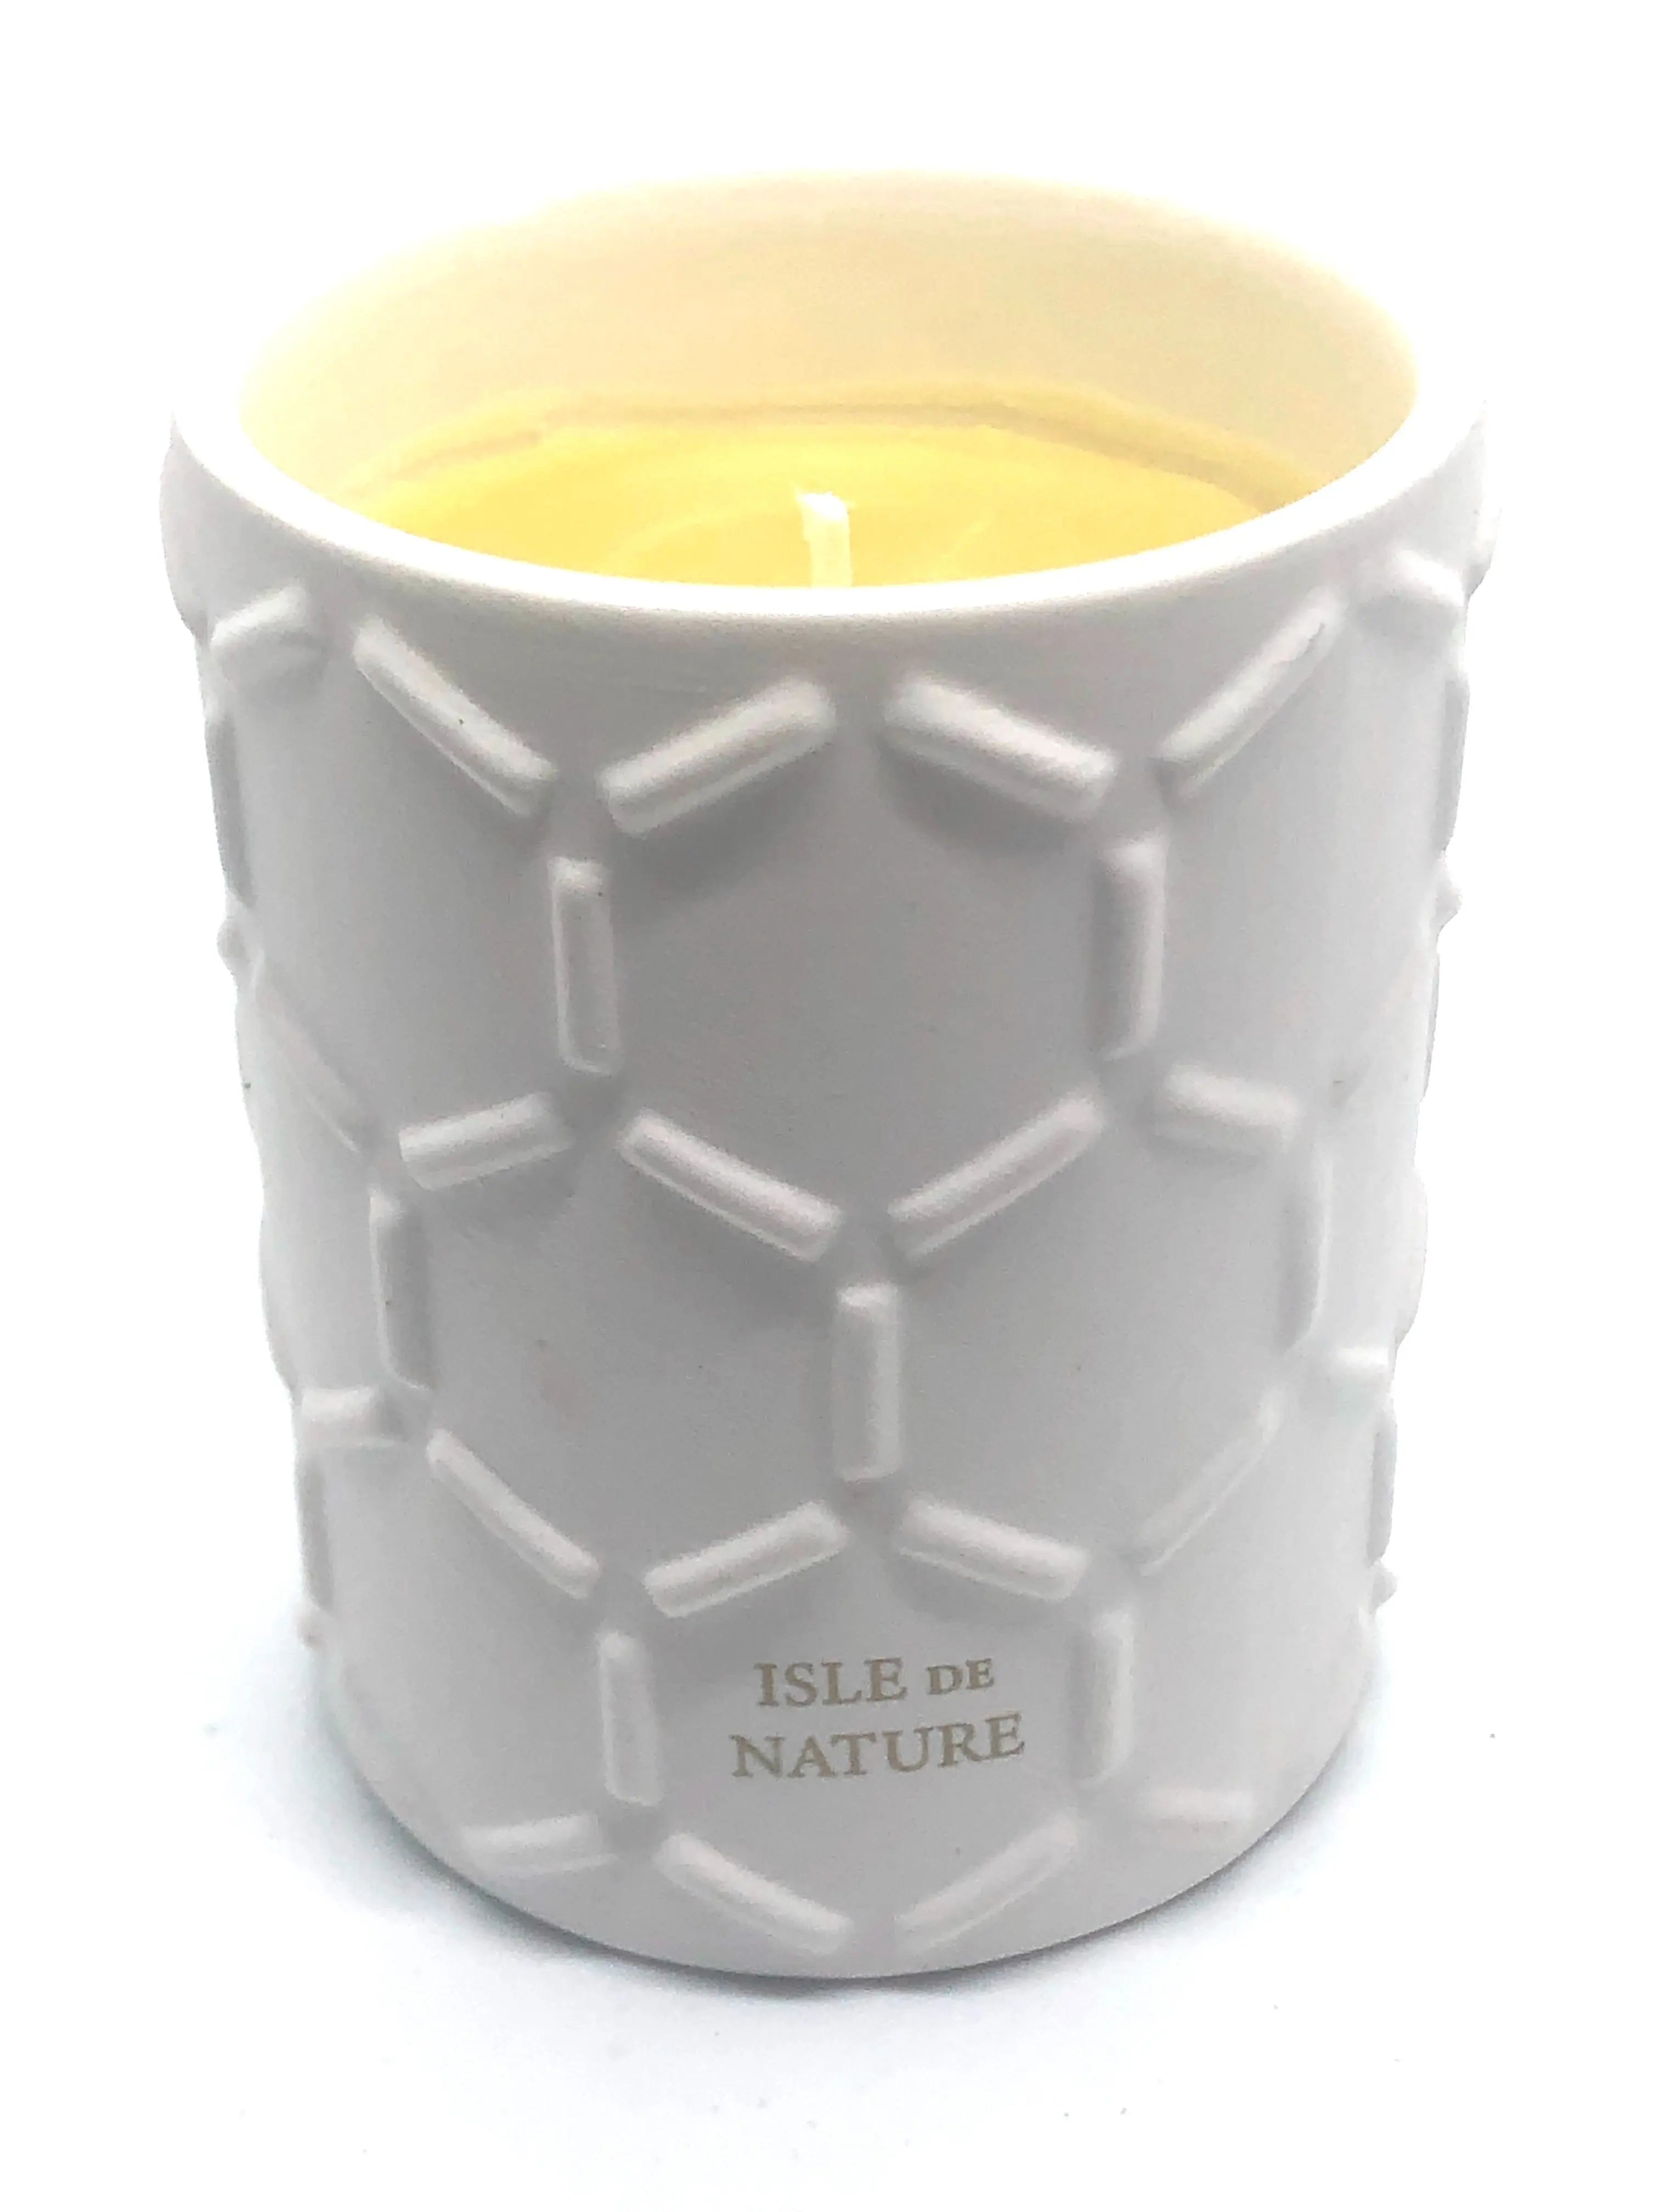 Pagua Bay Votive Candle by Isle de Nature Masami